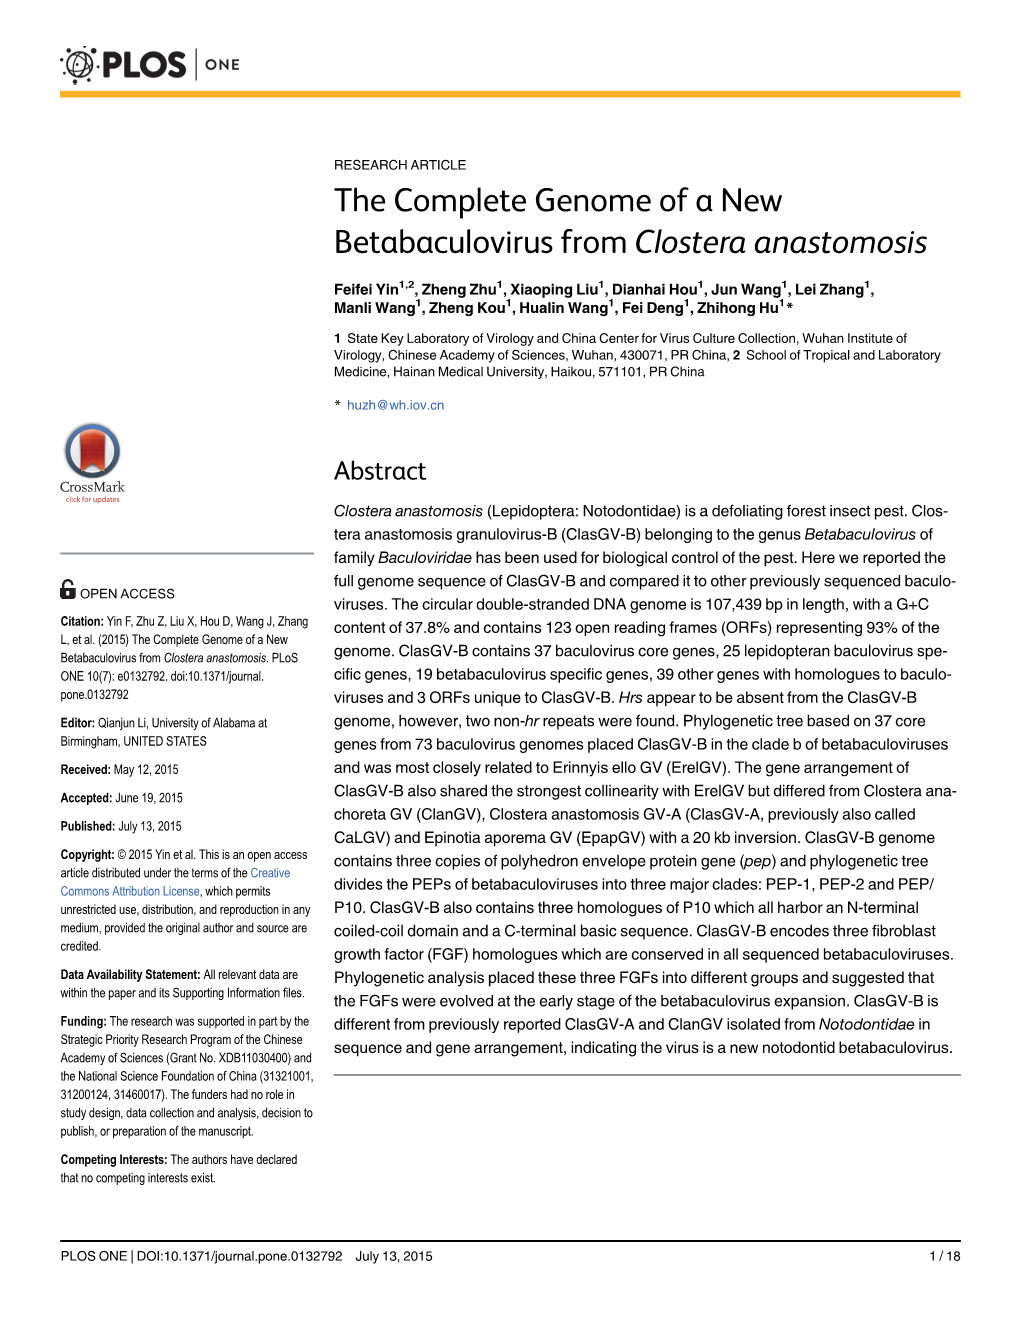 The Complete Genome of a New Betabaculovirus from Clostera Anastomosis